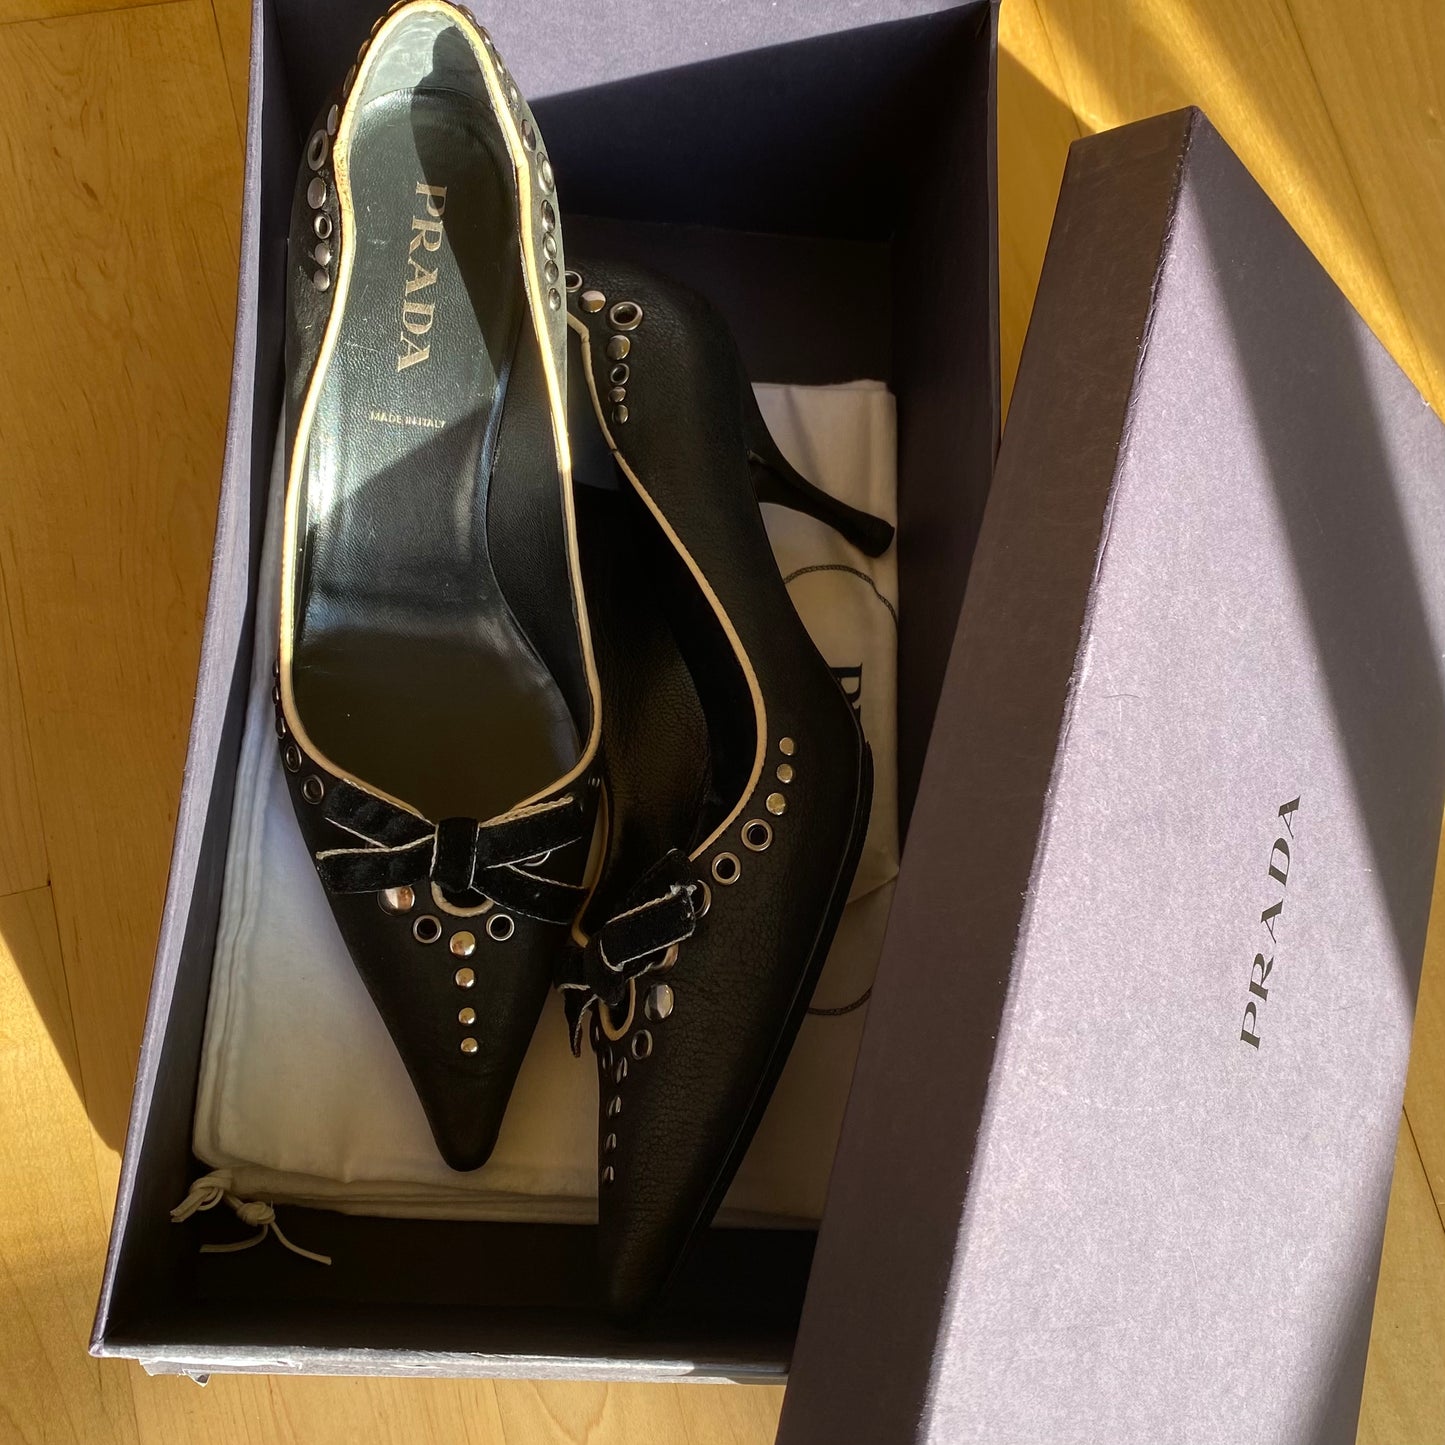 Prada 2001 Black Leather Bow Pointed Toe Pumps